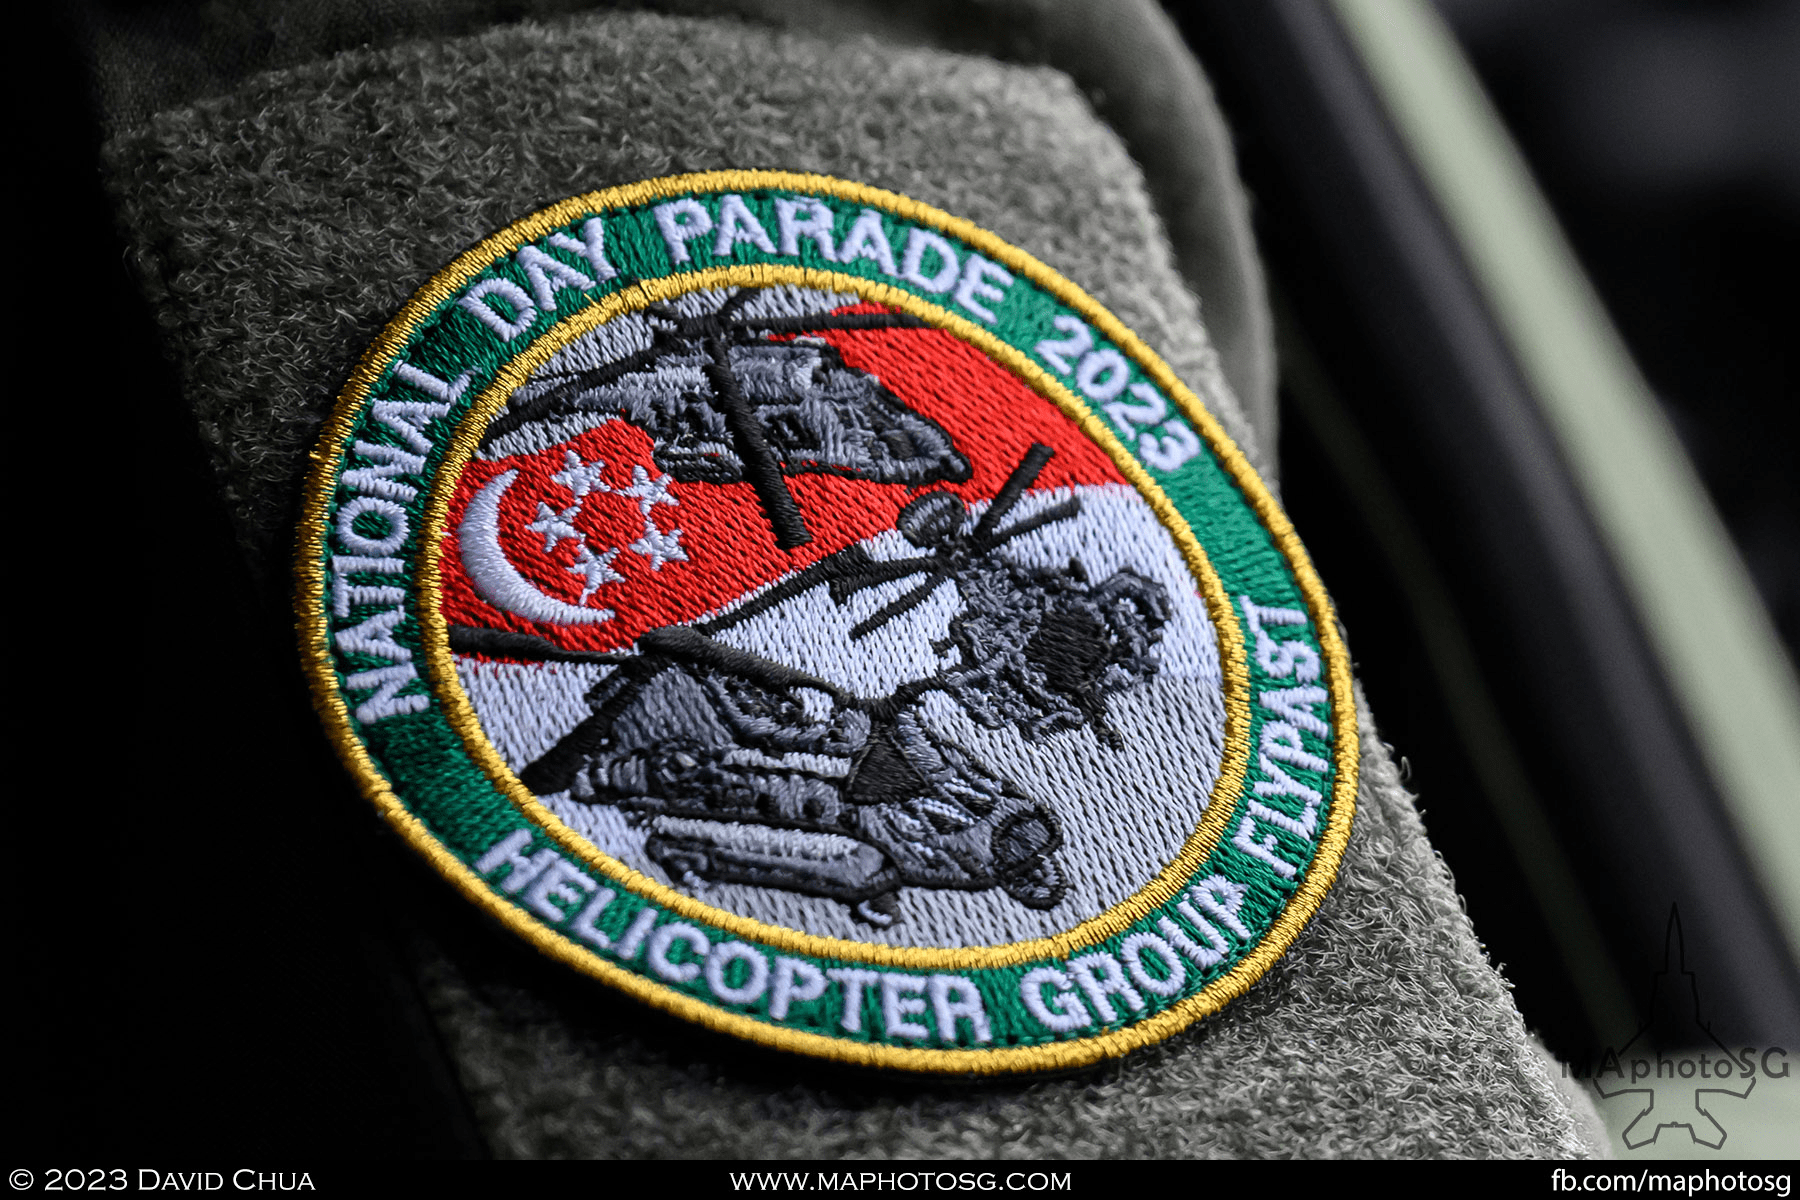 RSAF Helicopter Group Flypast patch worn by all the aircrews participating.